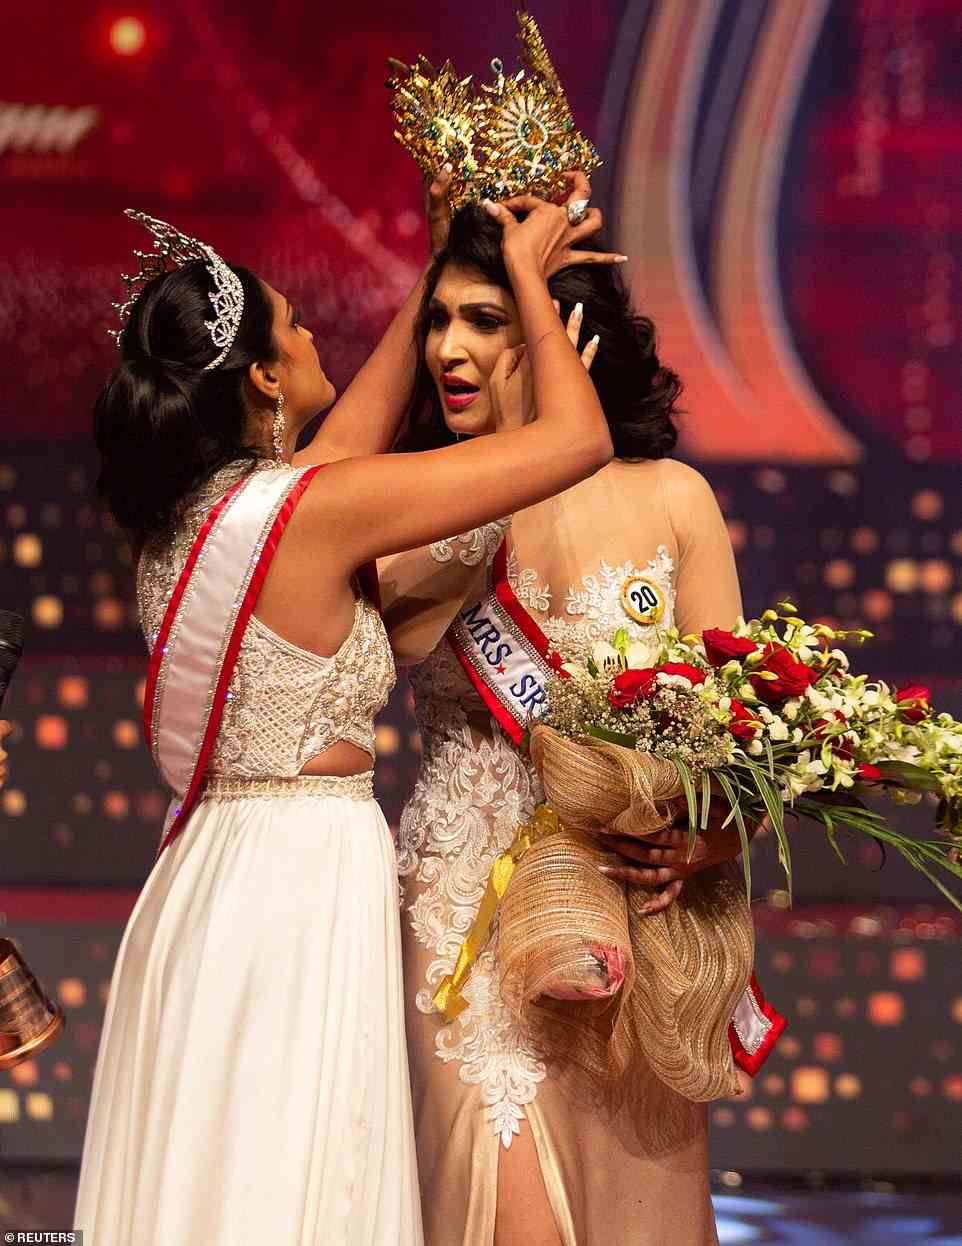 Pushpika De Silva, who won Miss Sri Lanka in April 2020, was left 'injured' after past winner Caroline Jurie ripped her crown off her head in a dramatic moment, which left audiences stunned